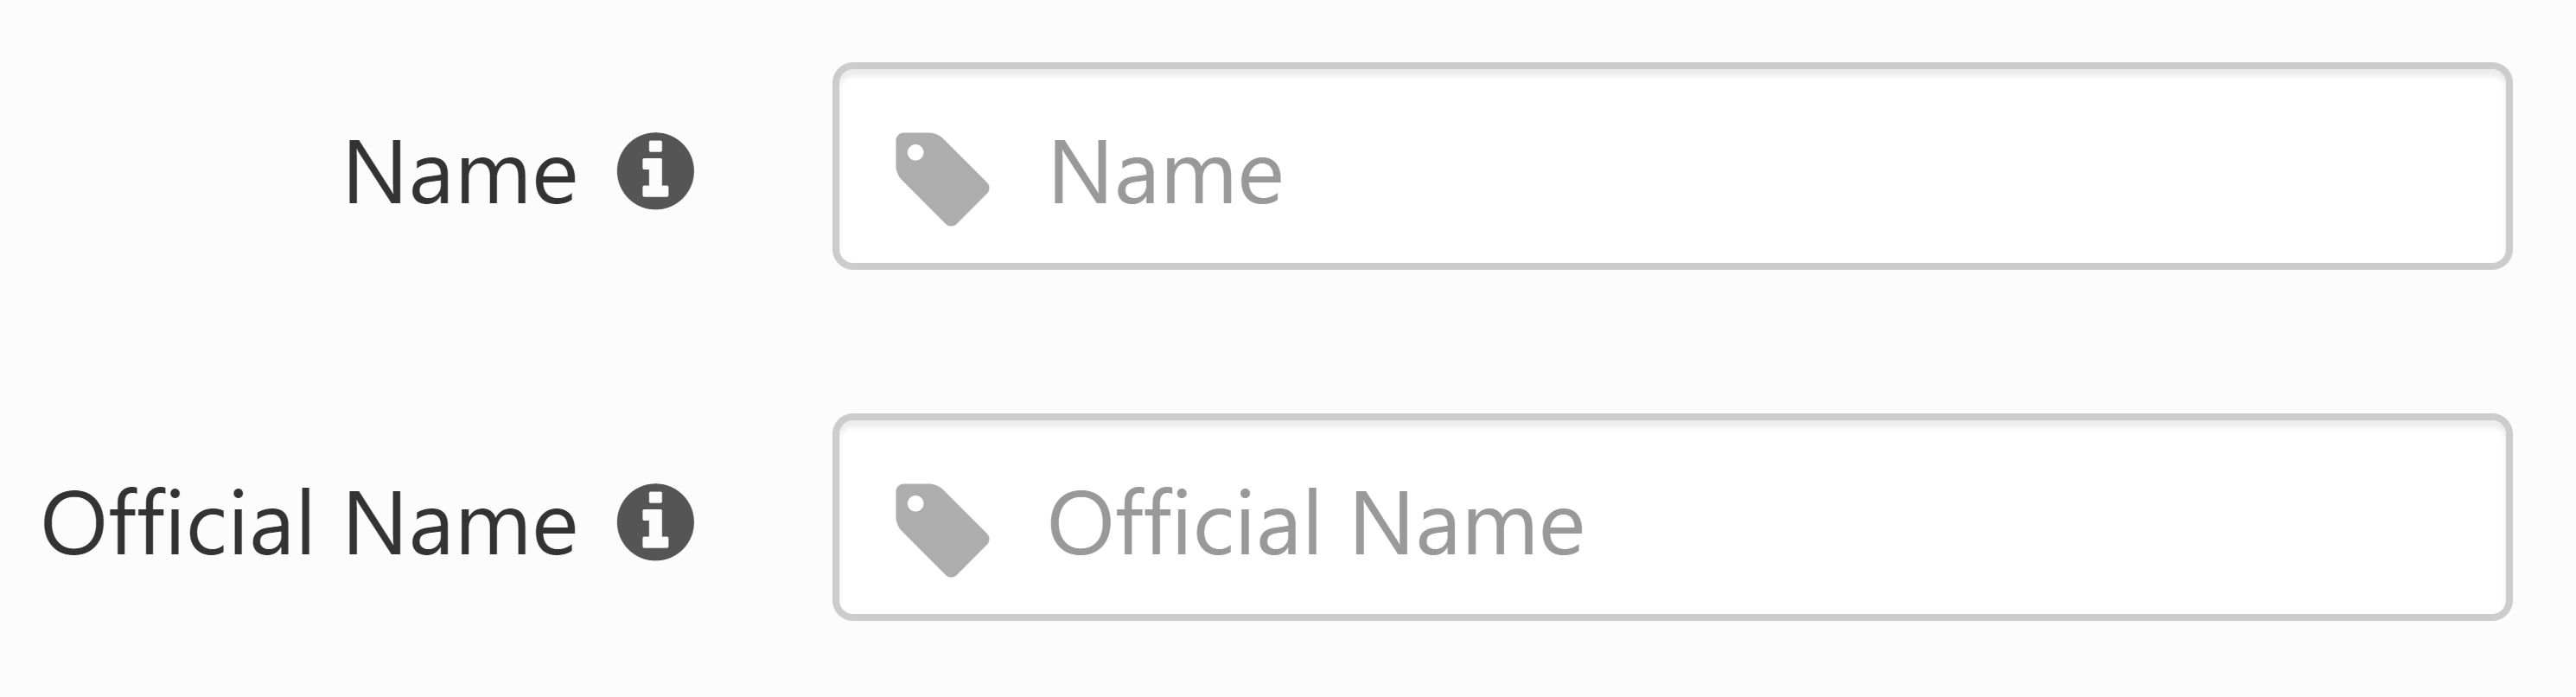 create-name-official-name.png